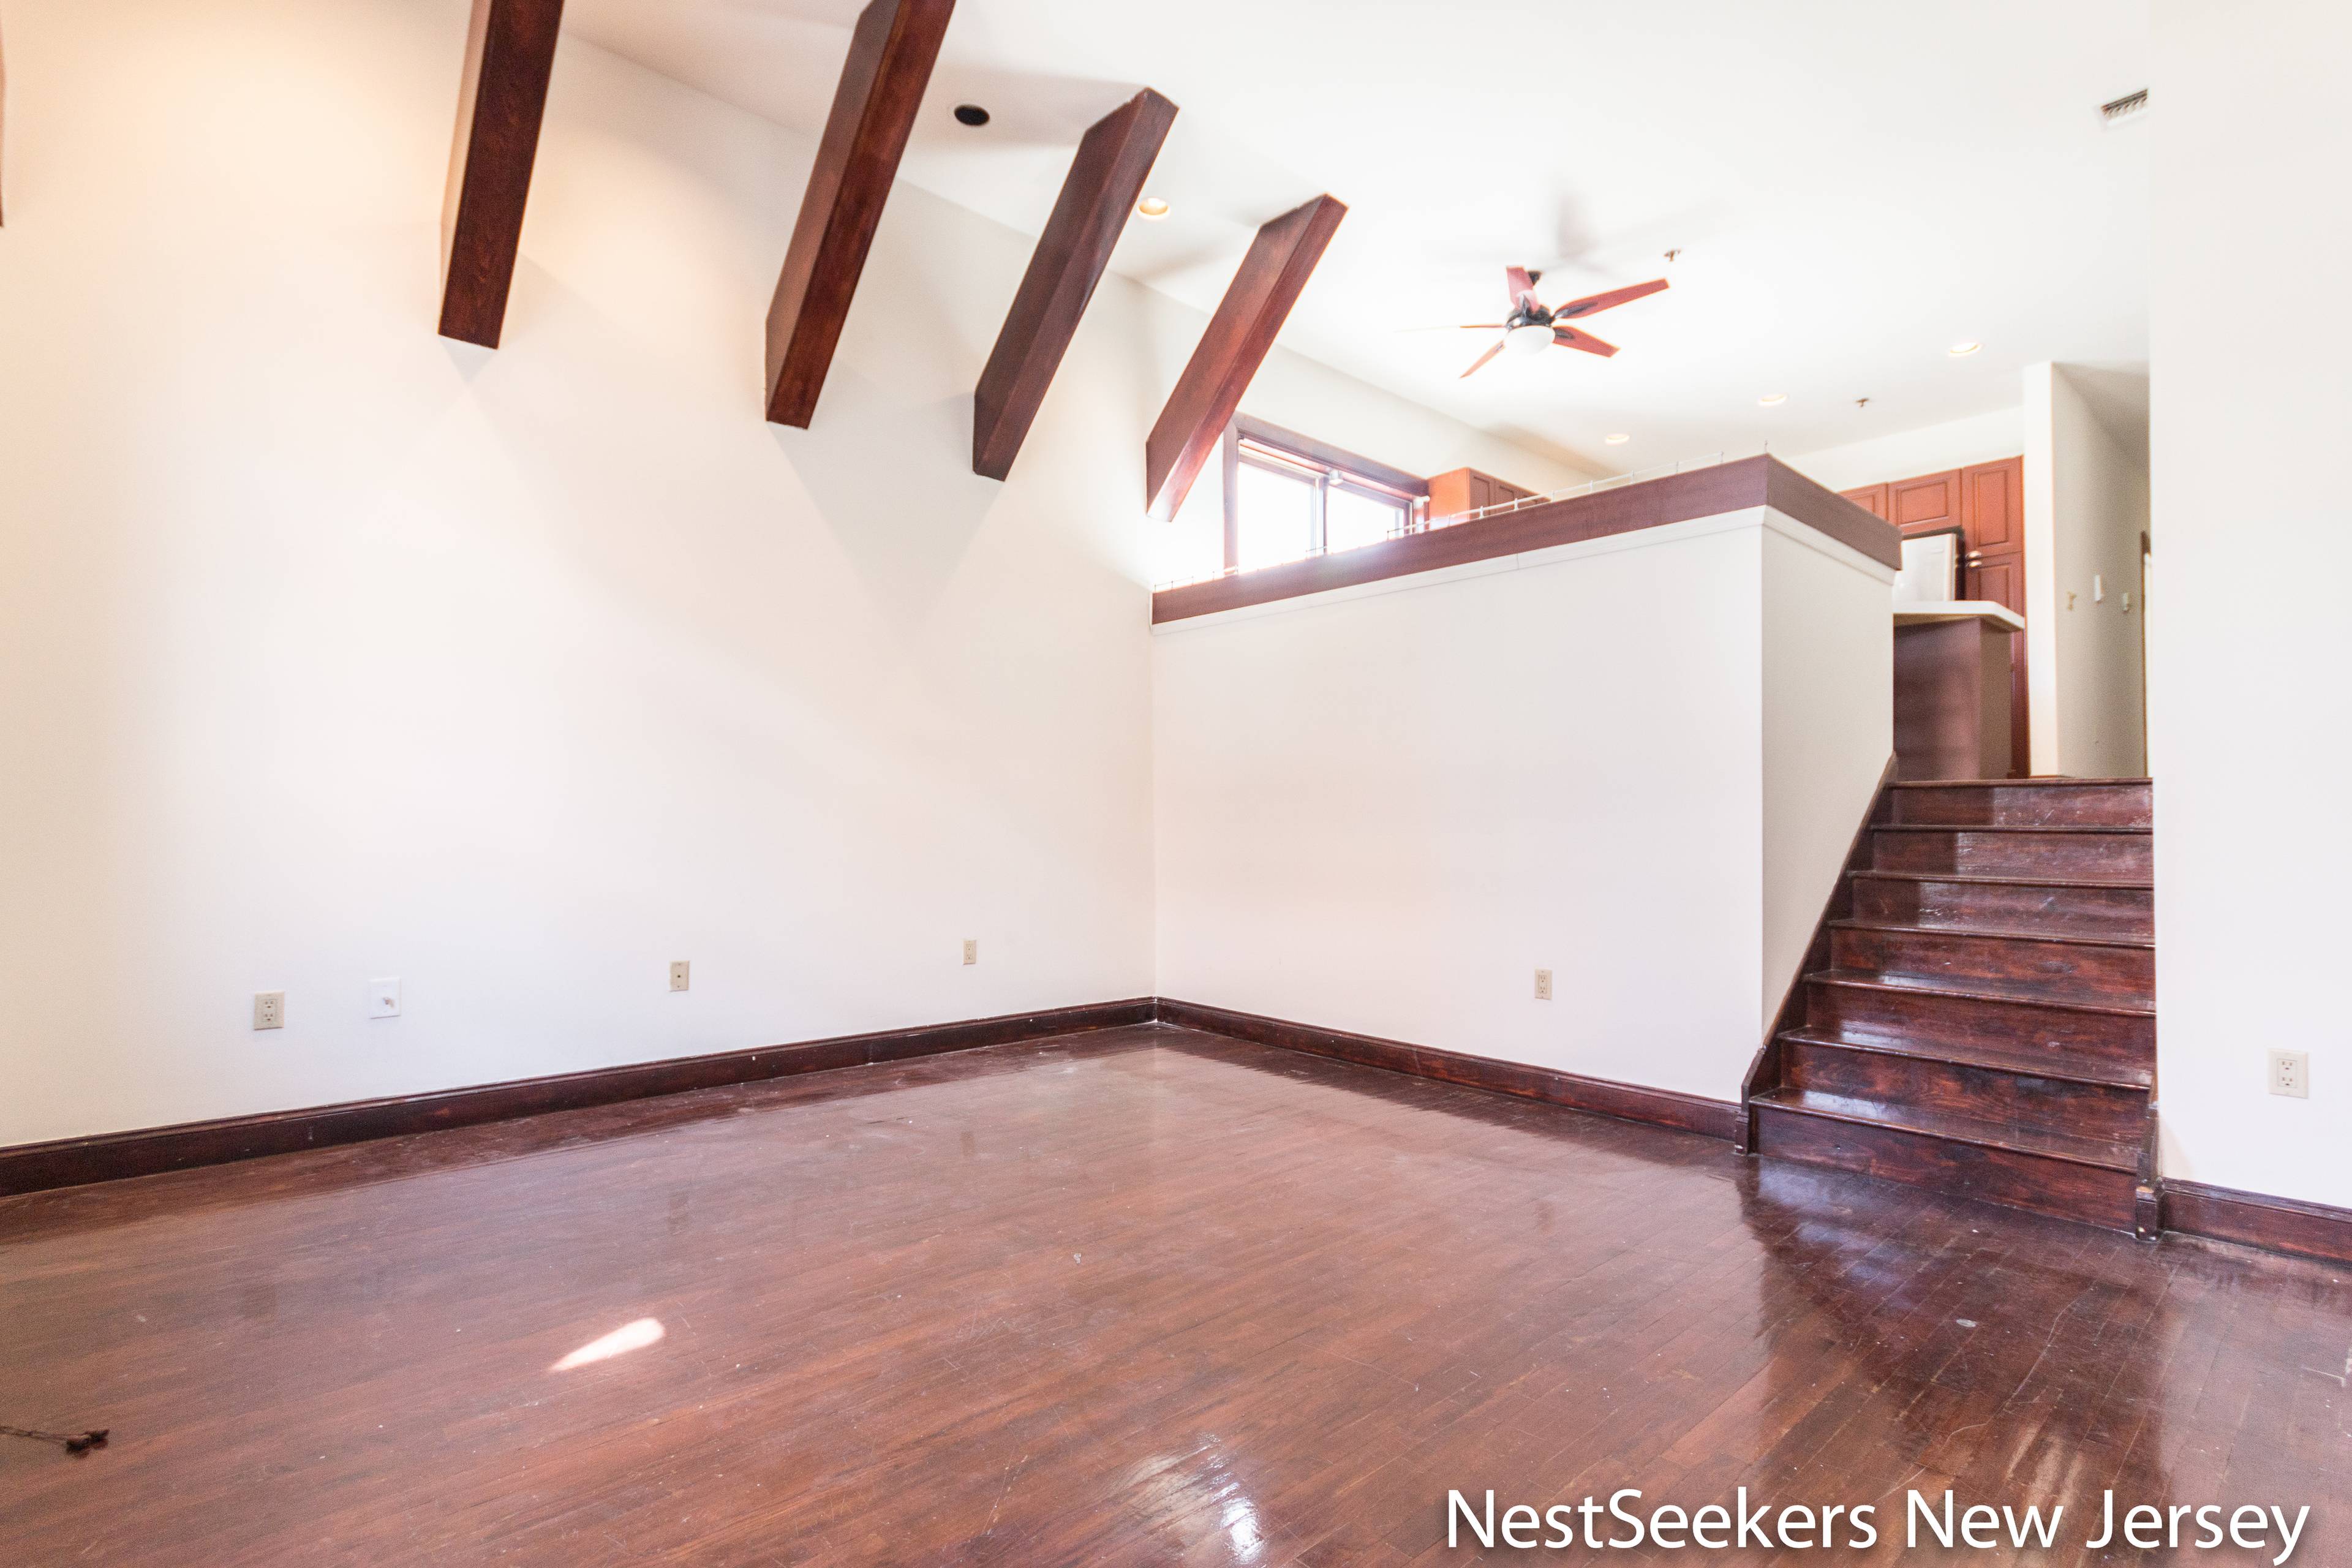 Stunning 3BR/2BA Loft Apartment in PRIME Downtown Hoboken!  Mins to Lightrail, Path Station, Washington!  W/D In Unit!